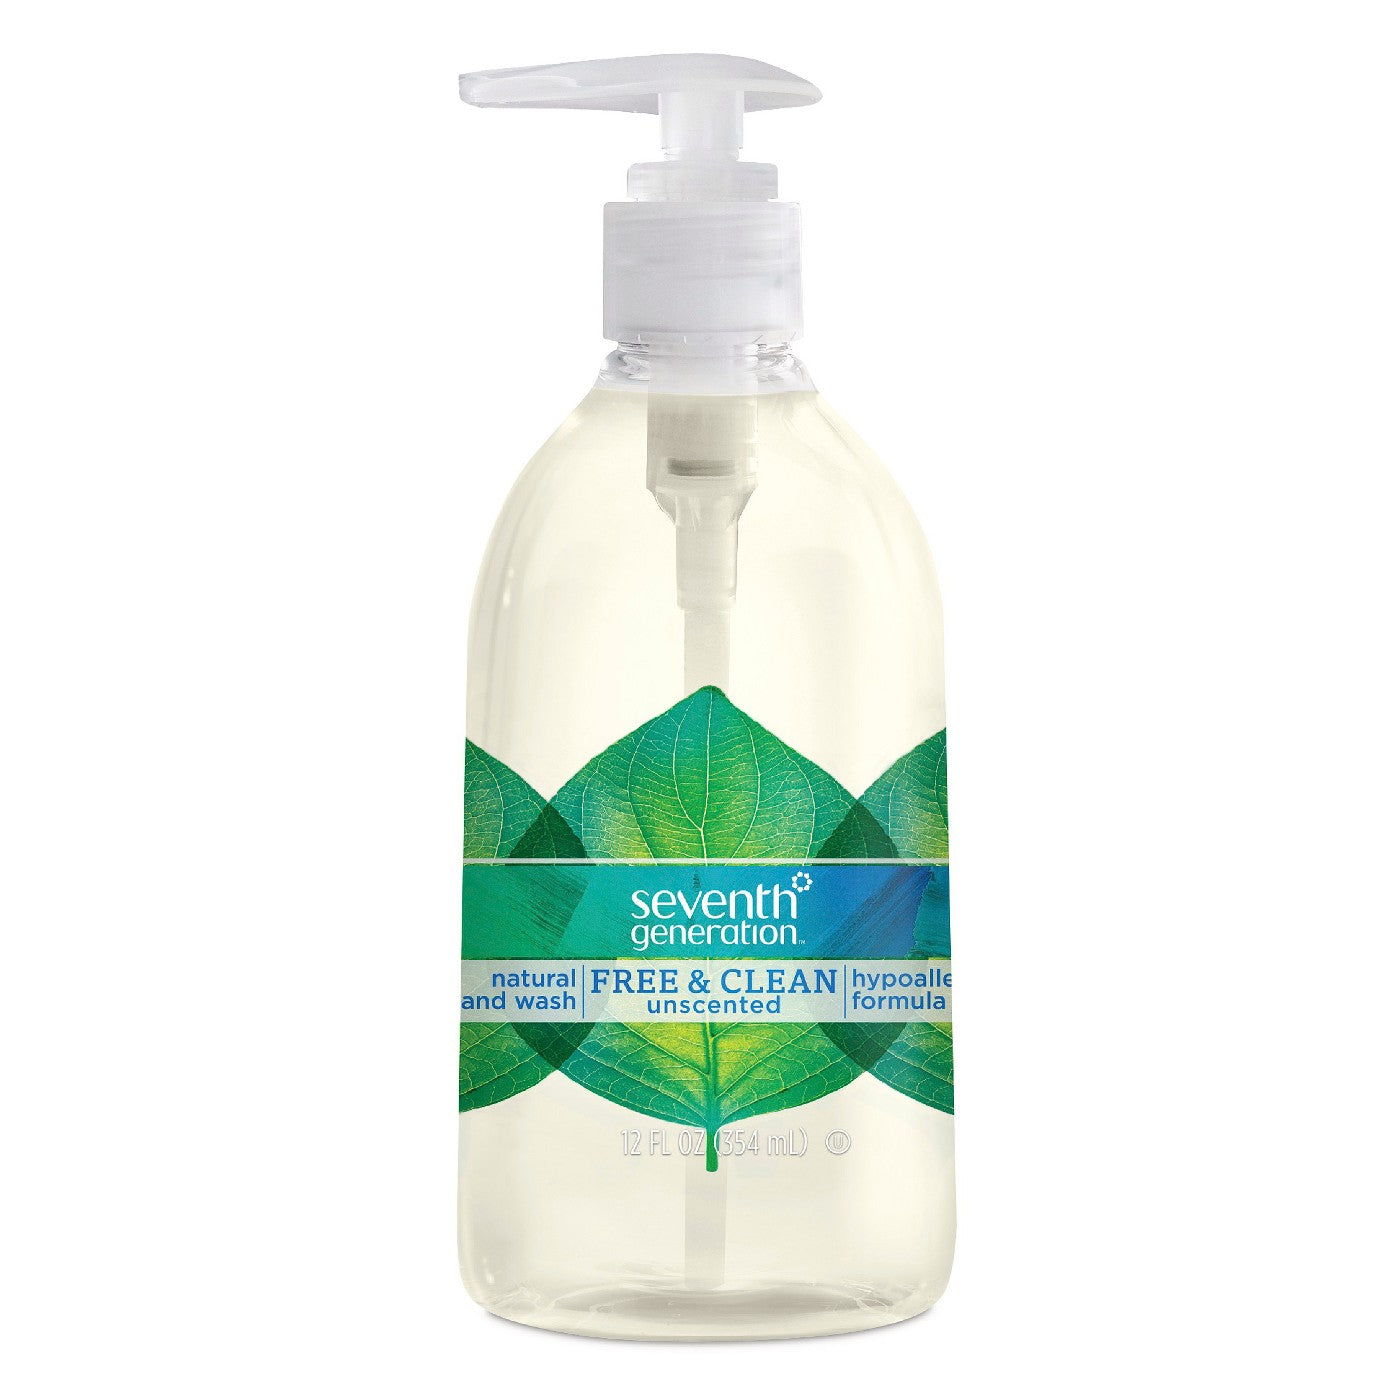 Seventh Generation Natural Hand Wash - Free & Clean unscented 12oz